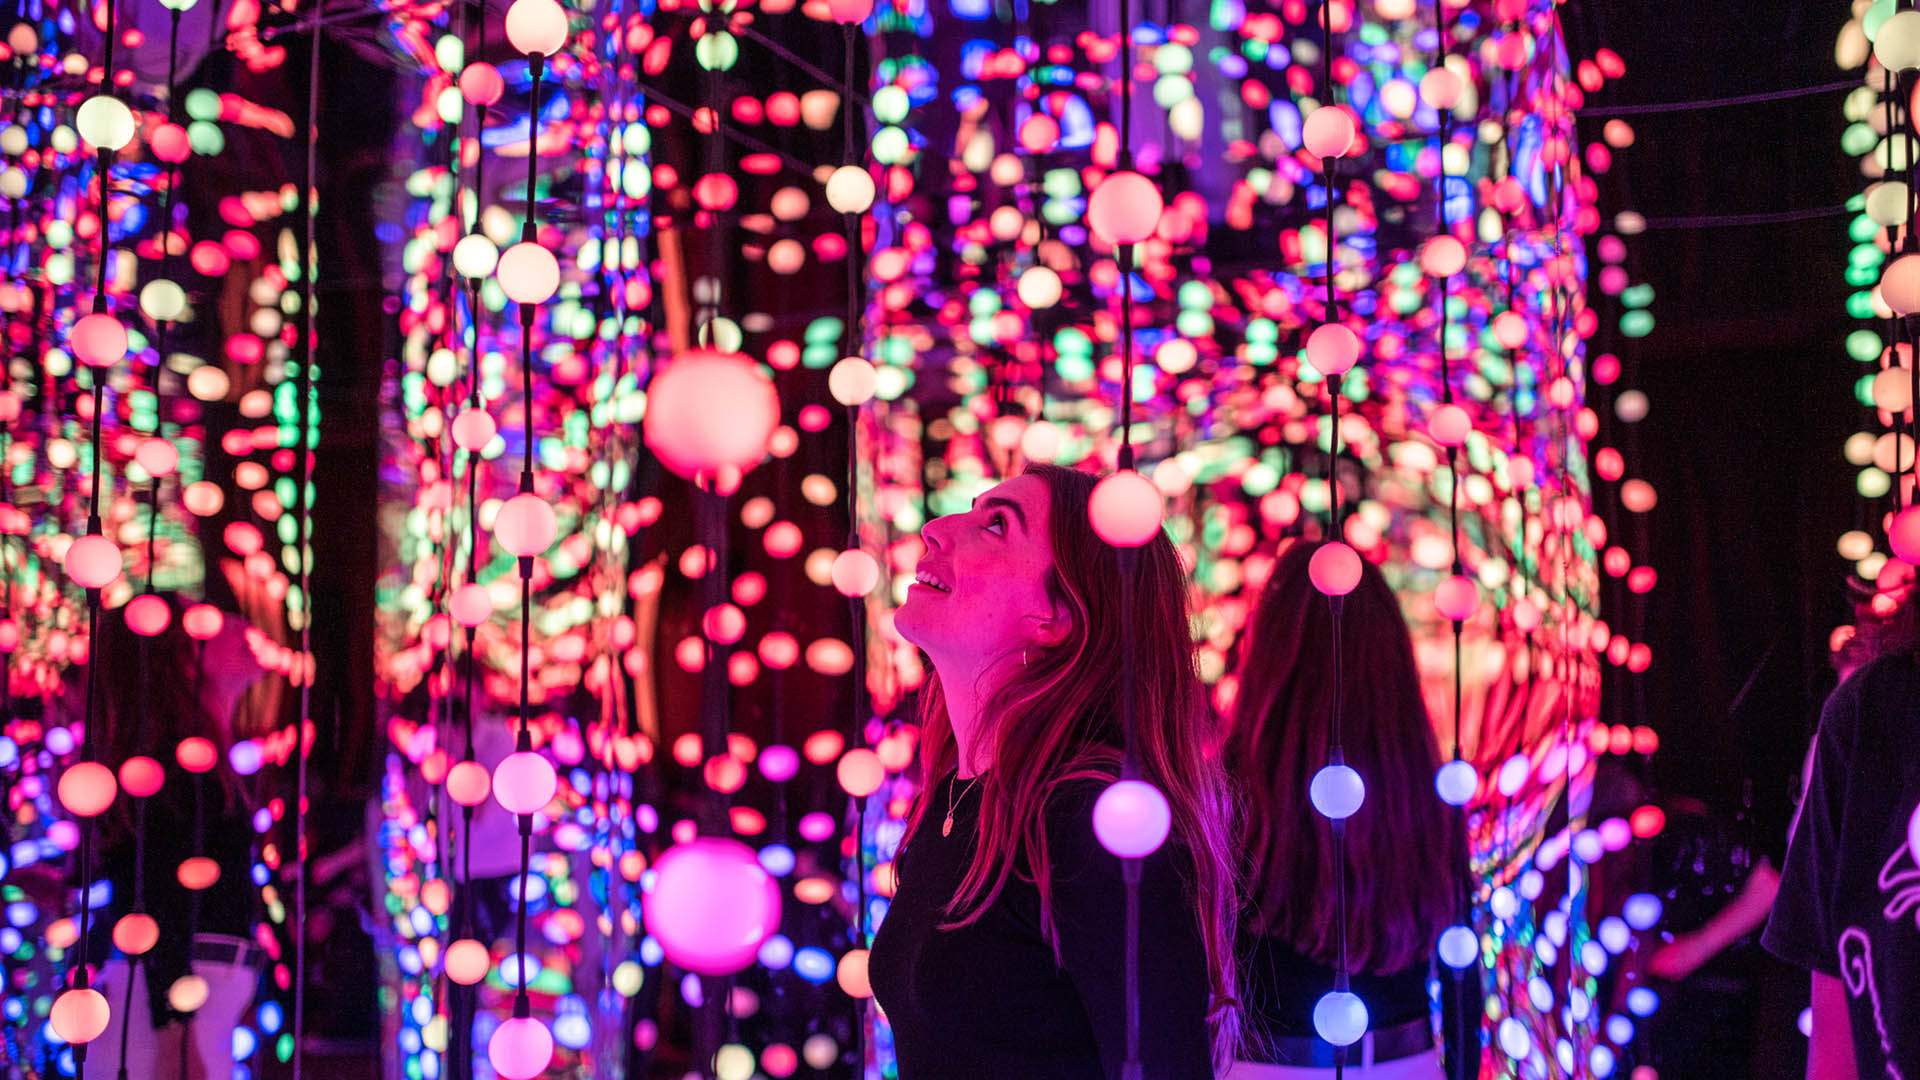 An Interactive Multi-Sensory Experience That's All About Making You Feel Happy Is Coming to Australia